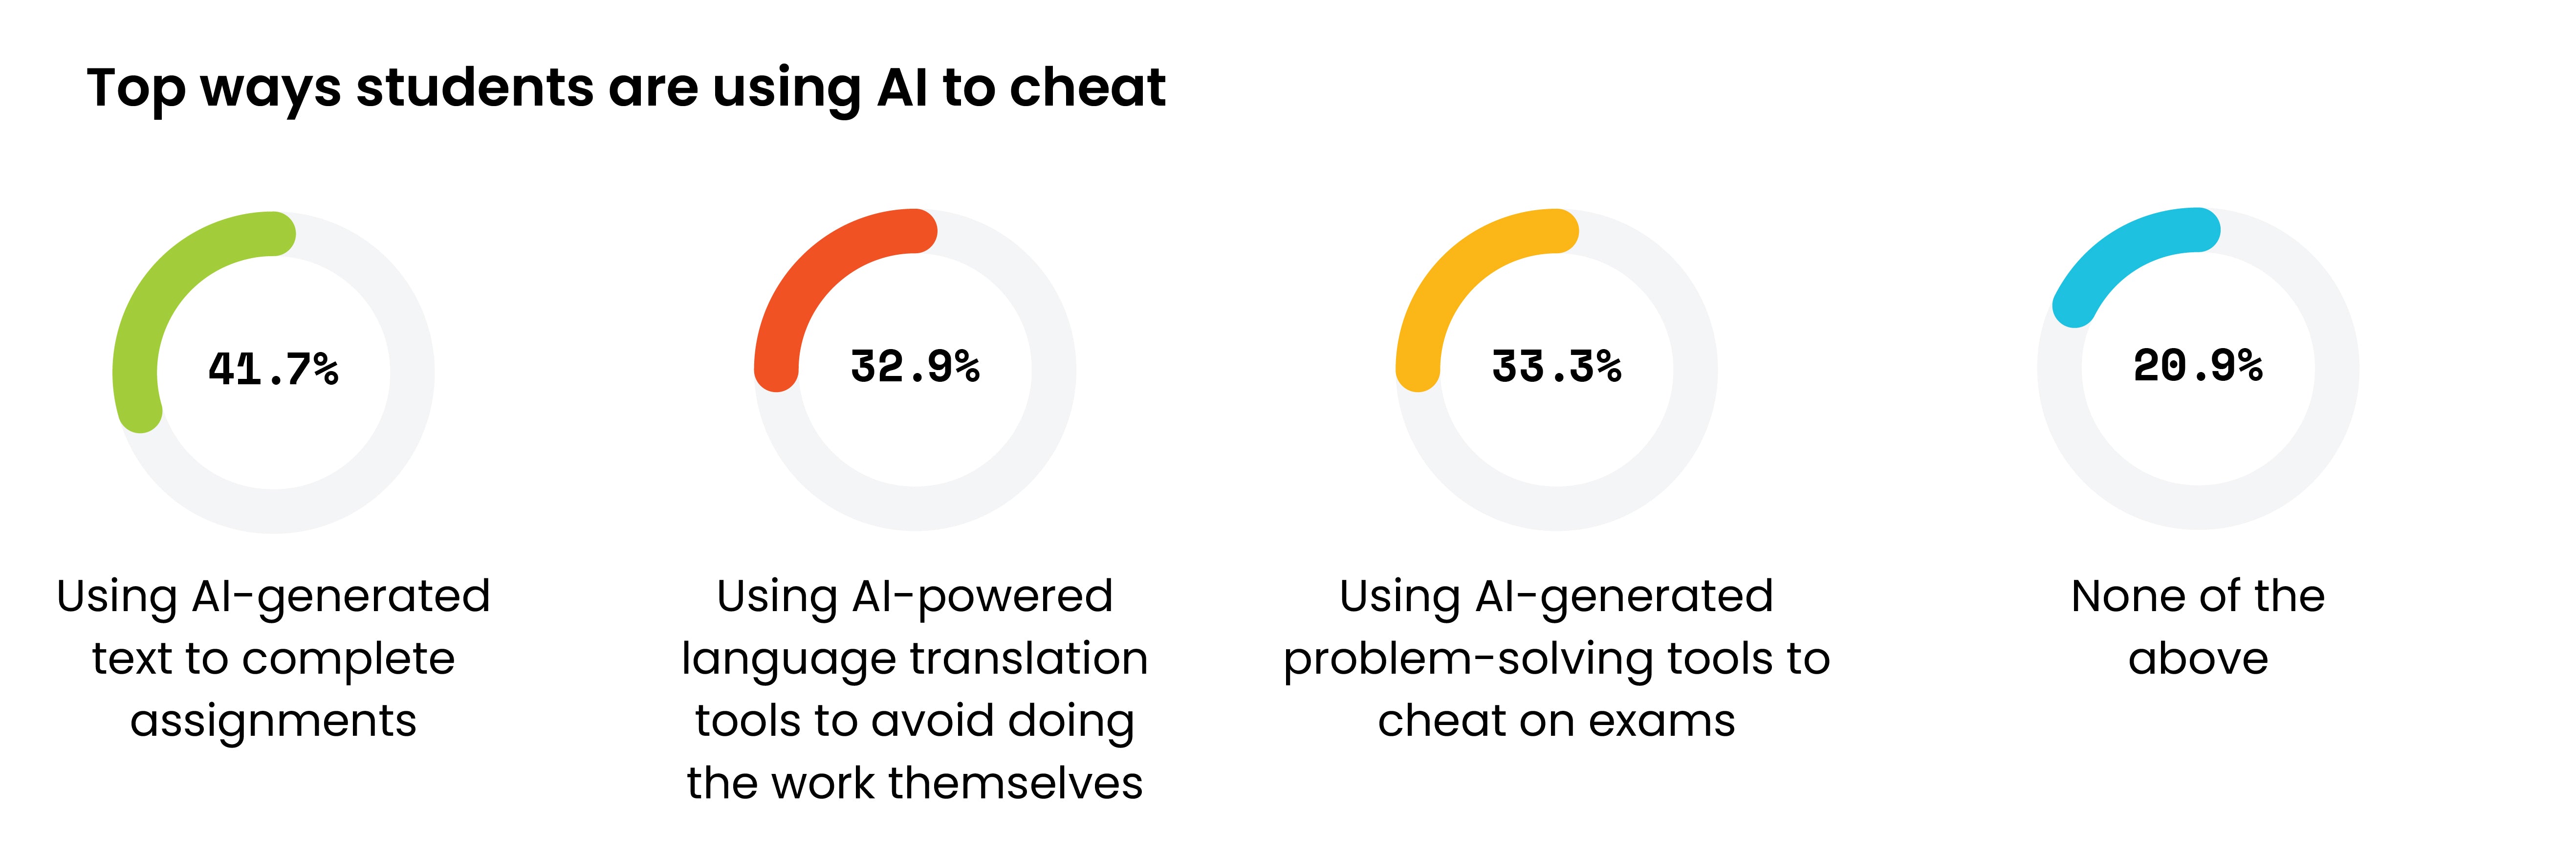 Top Ways Students Use AI to Cheat